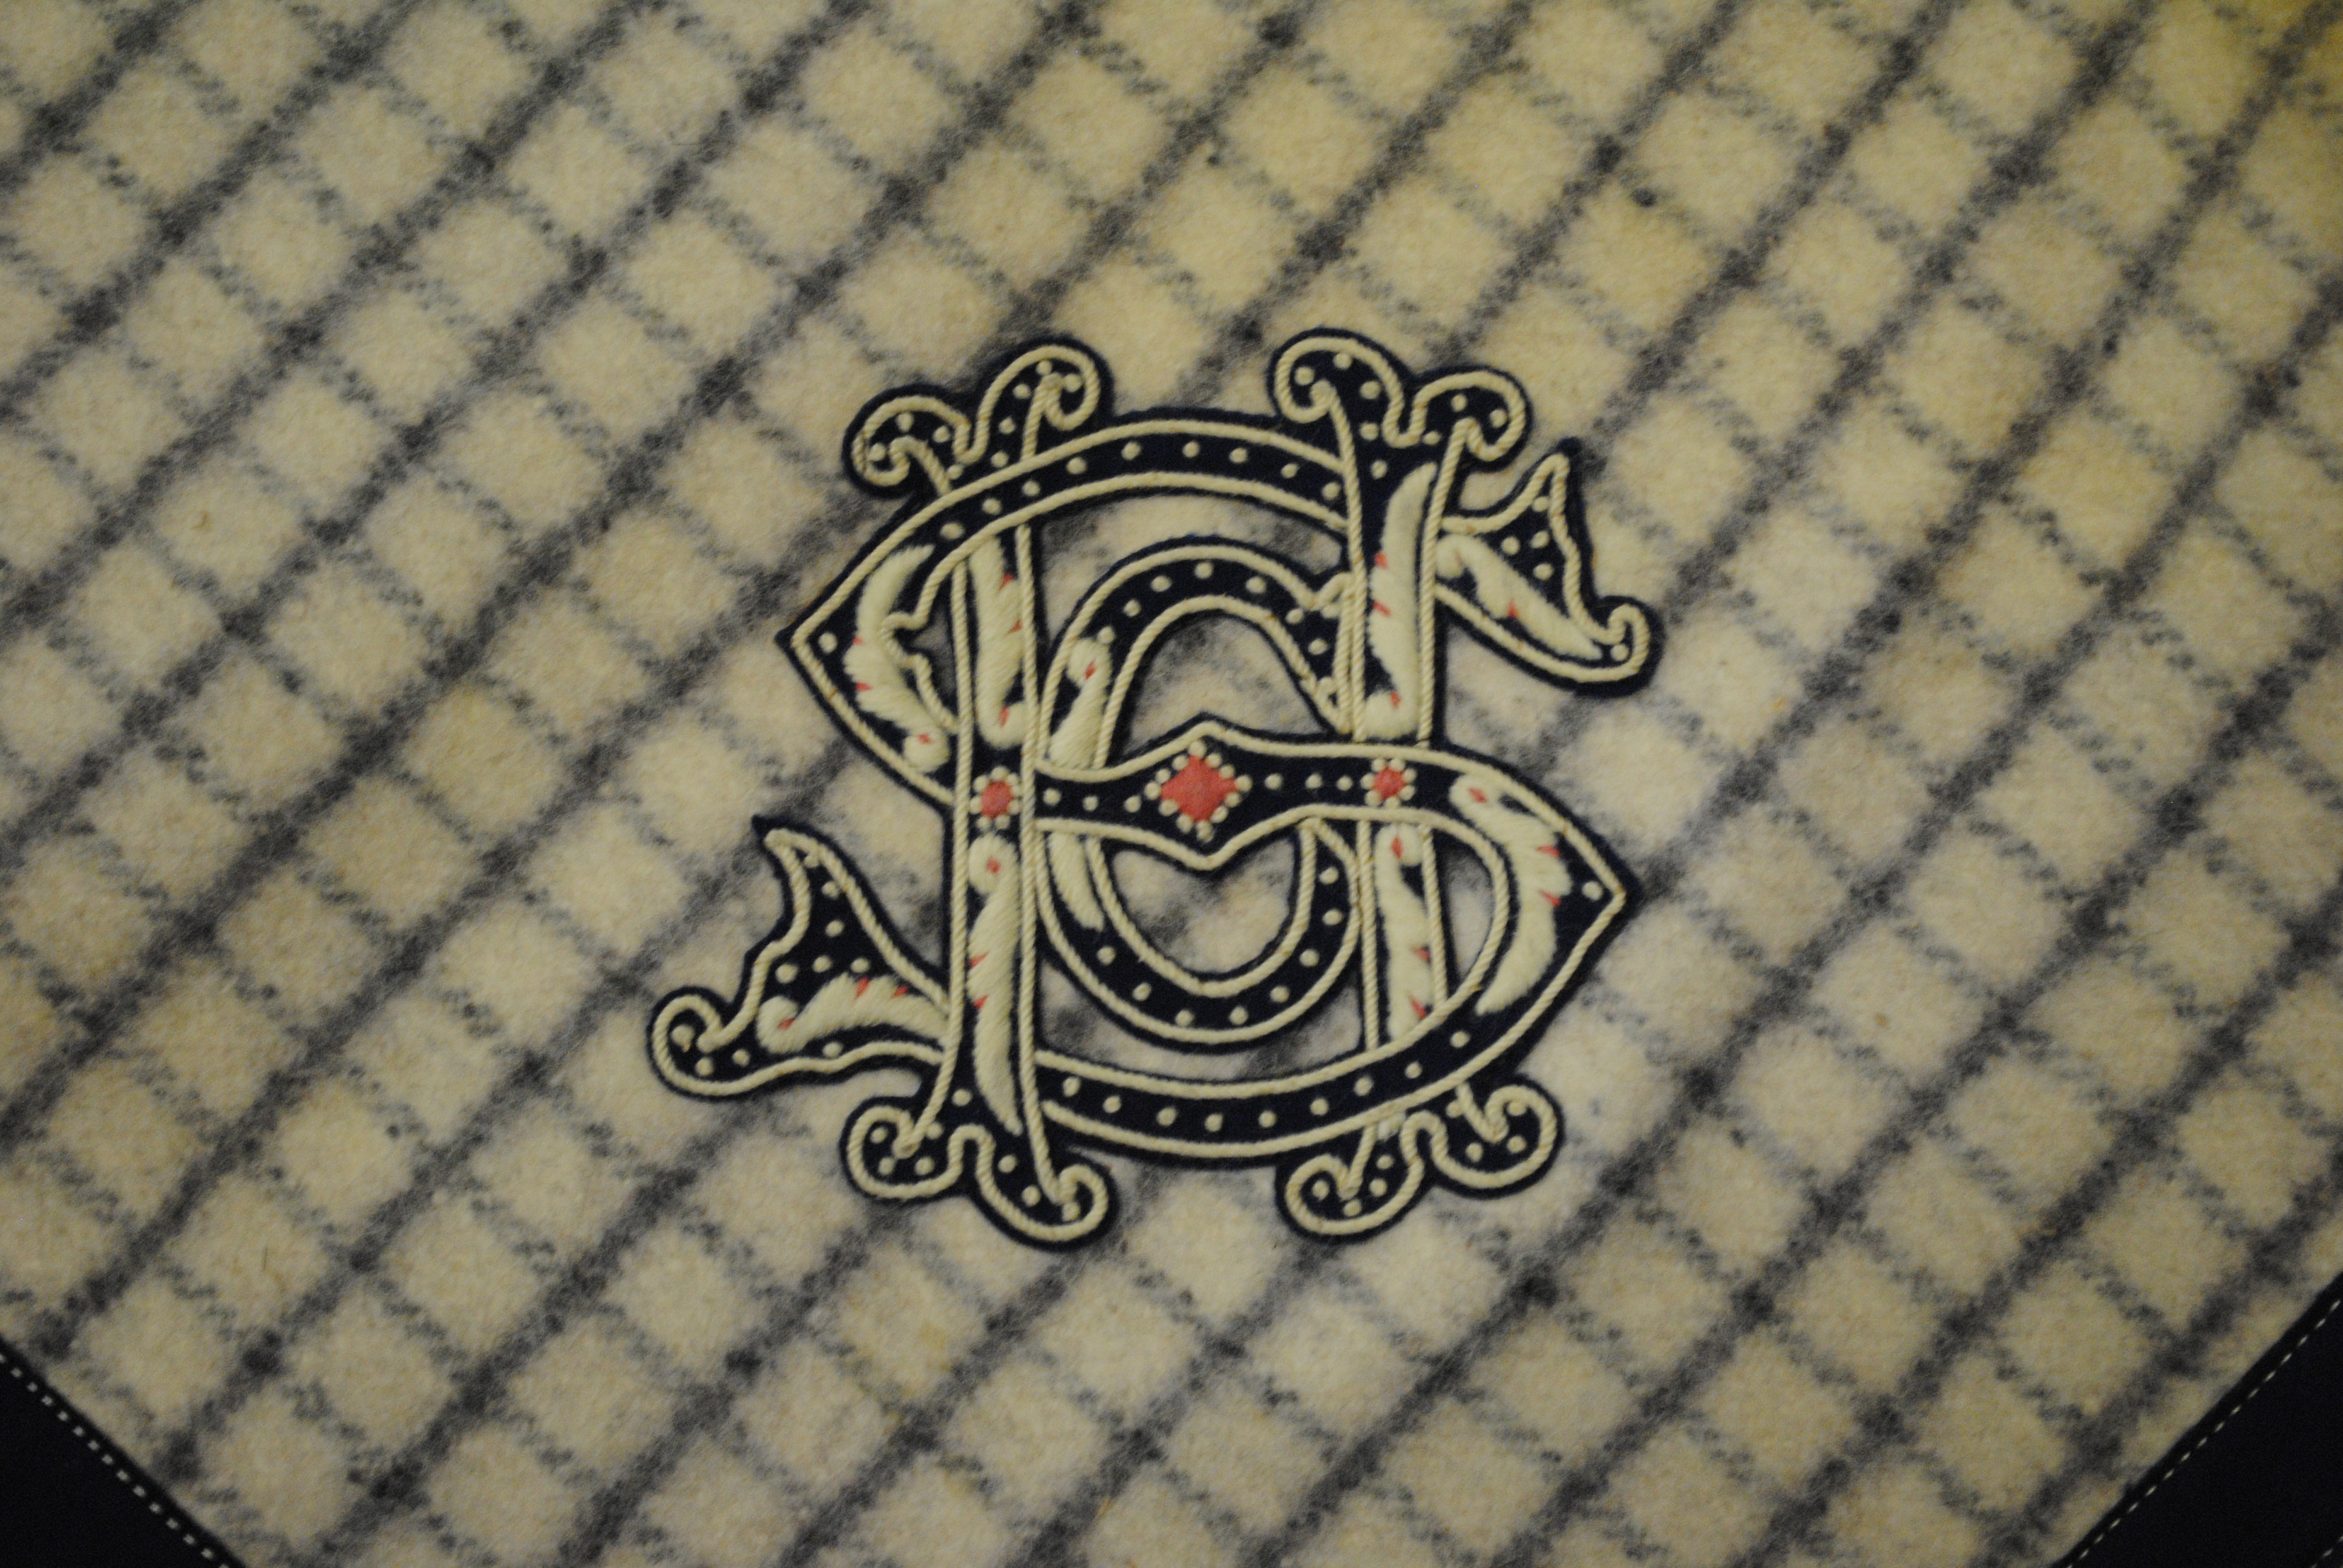 Detail of a saddle blanket with Sarah Cooper Hewitt’s monogram embroidered on it. Image courtesy of The Henry Ford Museum.